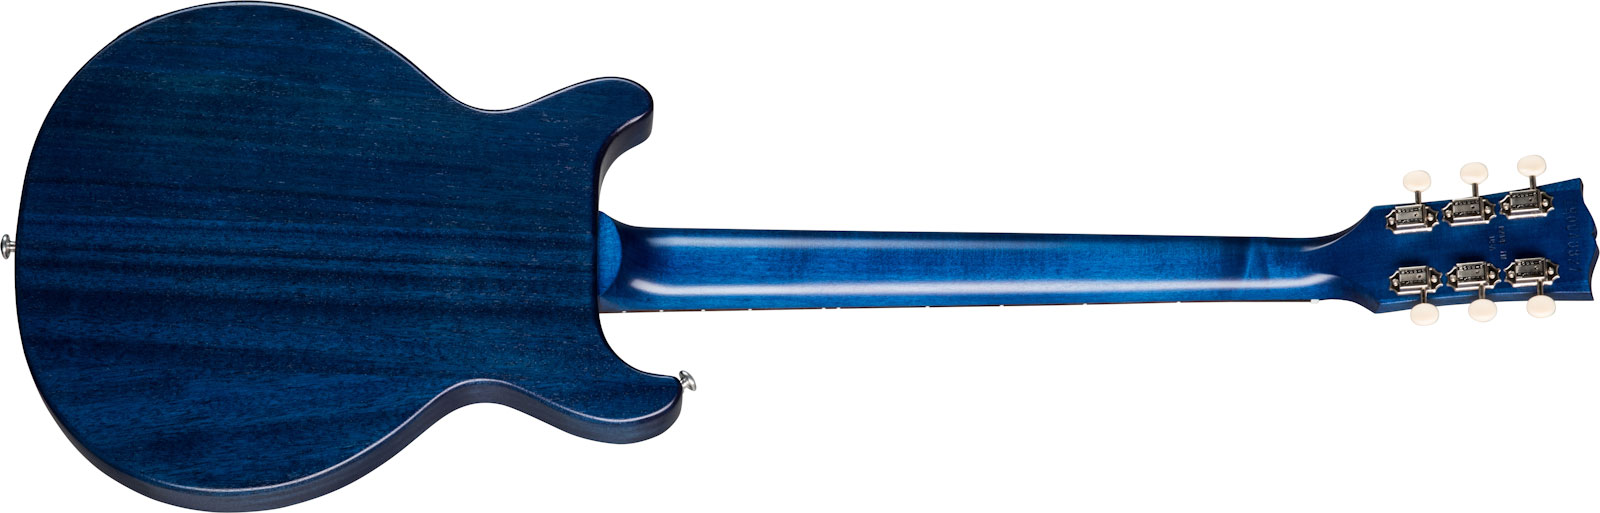 Gibson Les Paul Special Tribute Dc Modern P90 - Blue Stain - Double cut electric guitar - Variation 1